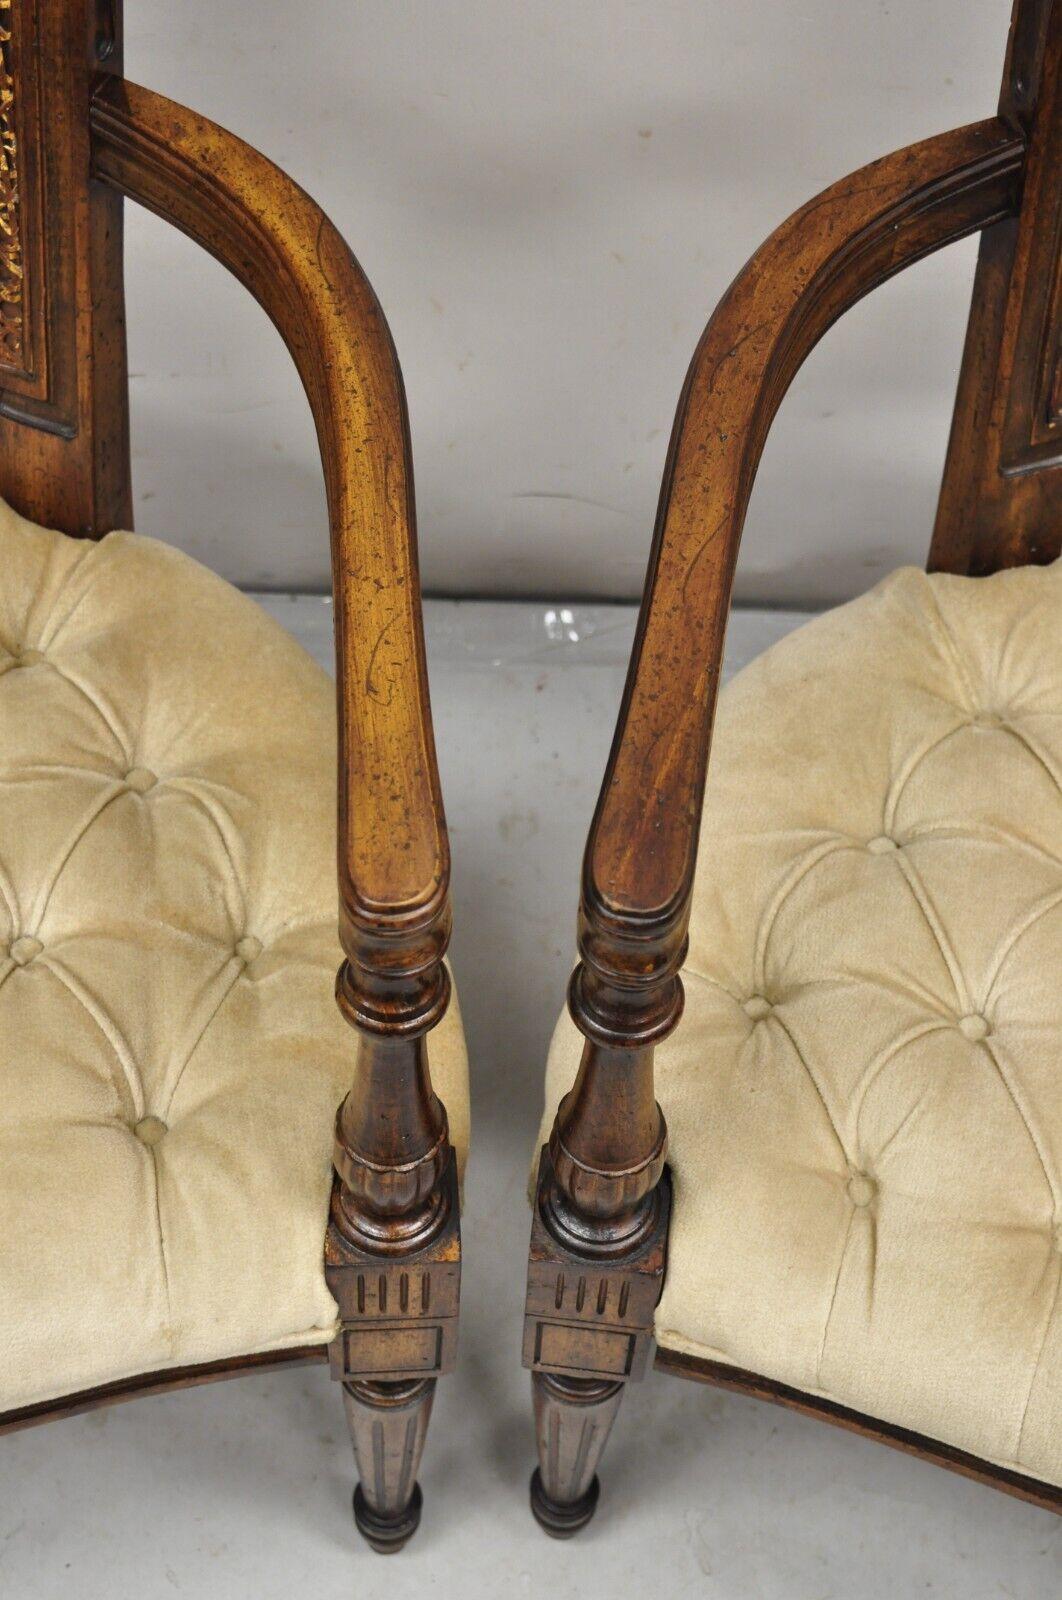 Vintage Hollywood Regency Tall Cane Back Fireside Lounge Armchairs - a Pair For Sale 1